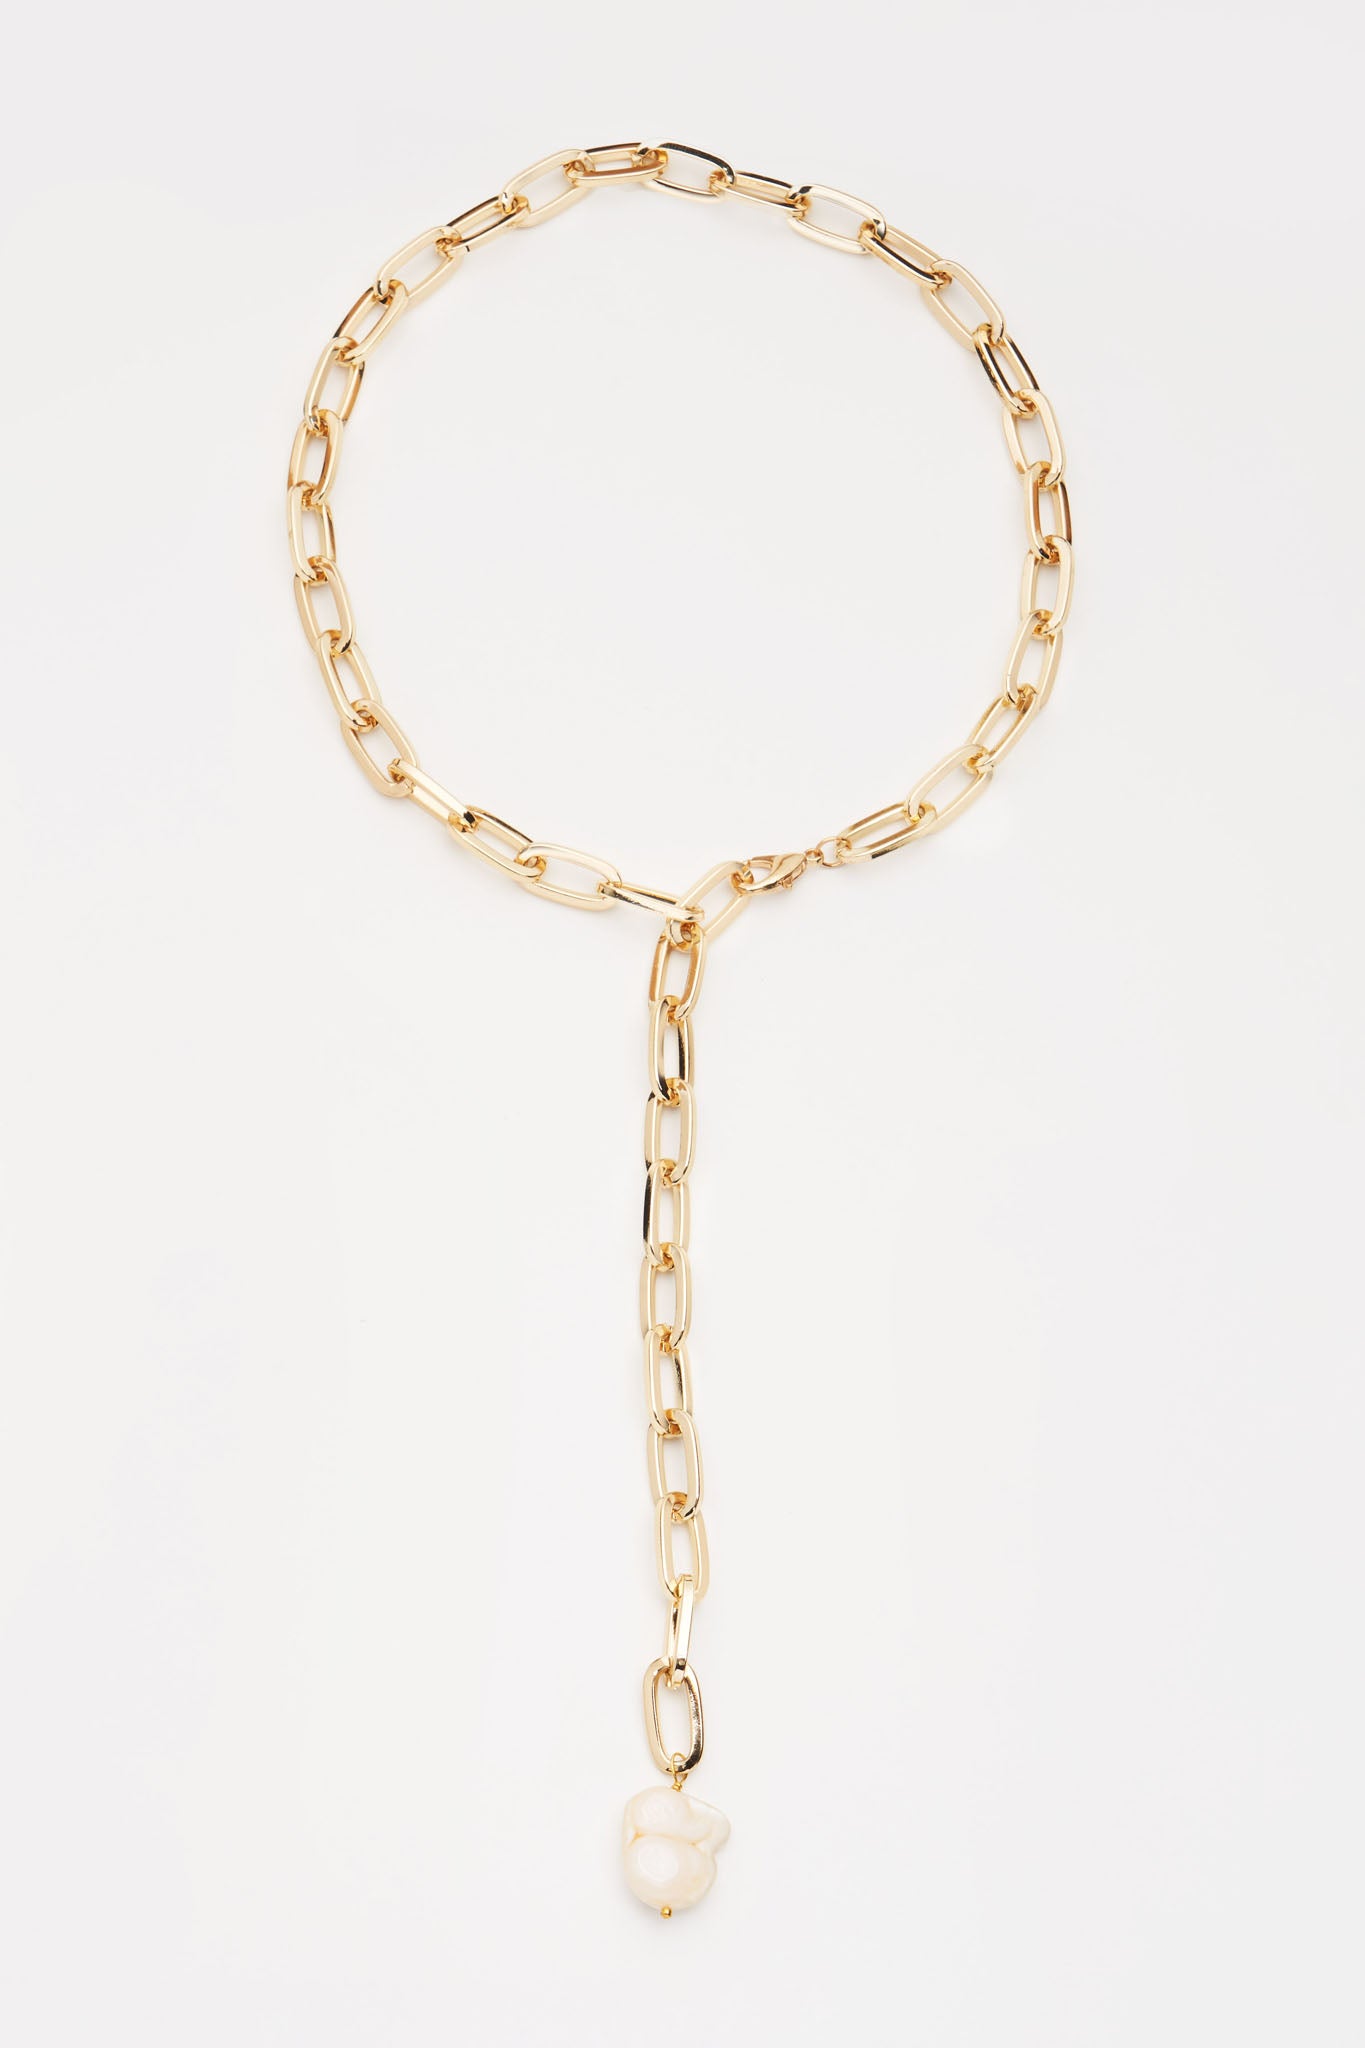 Gold lariat chain necklace with baroque pearl